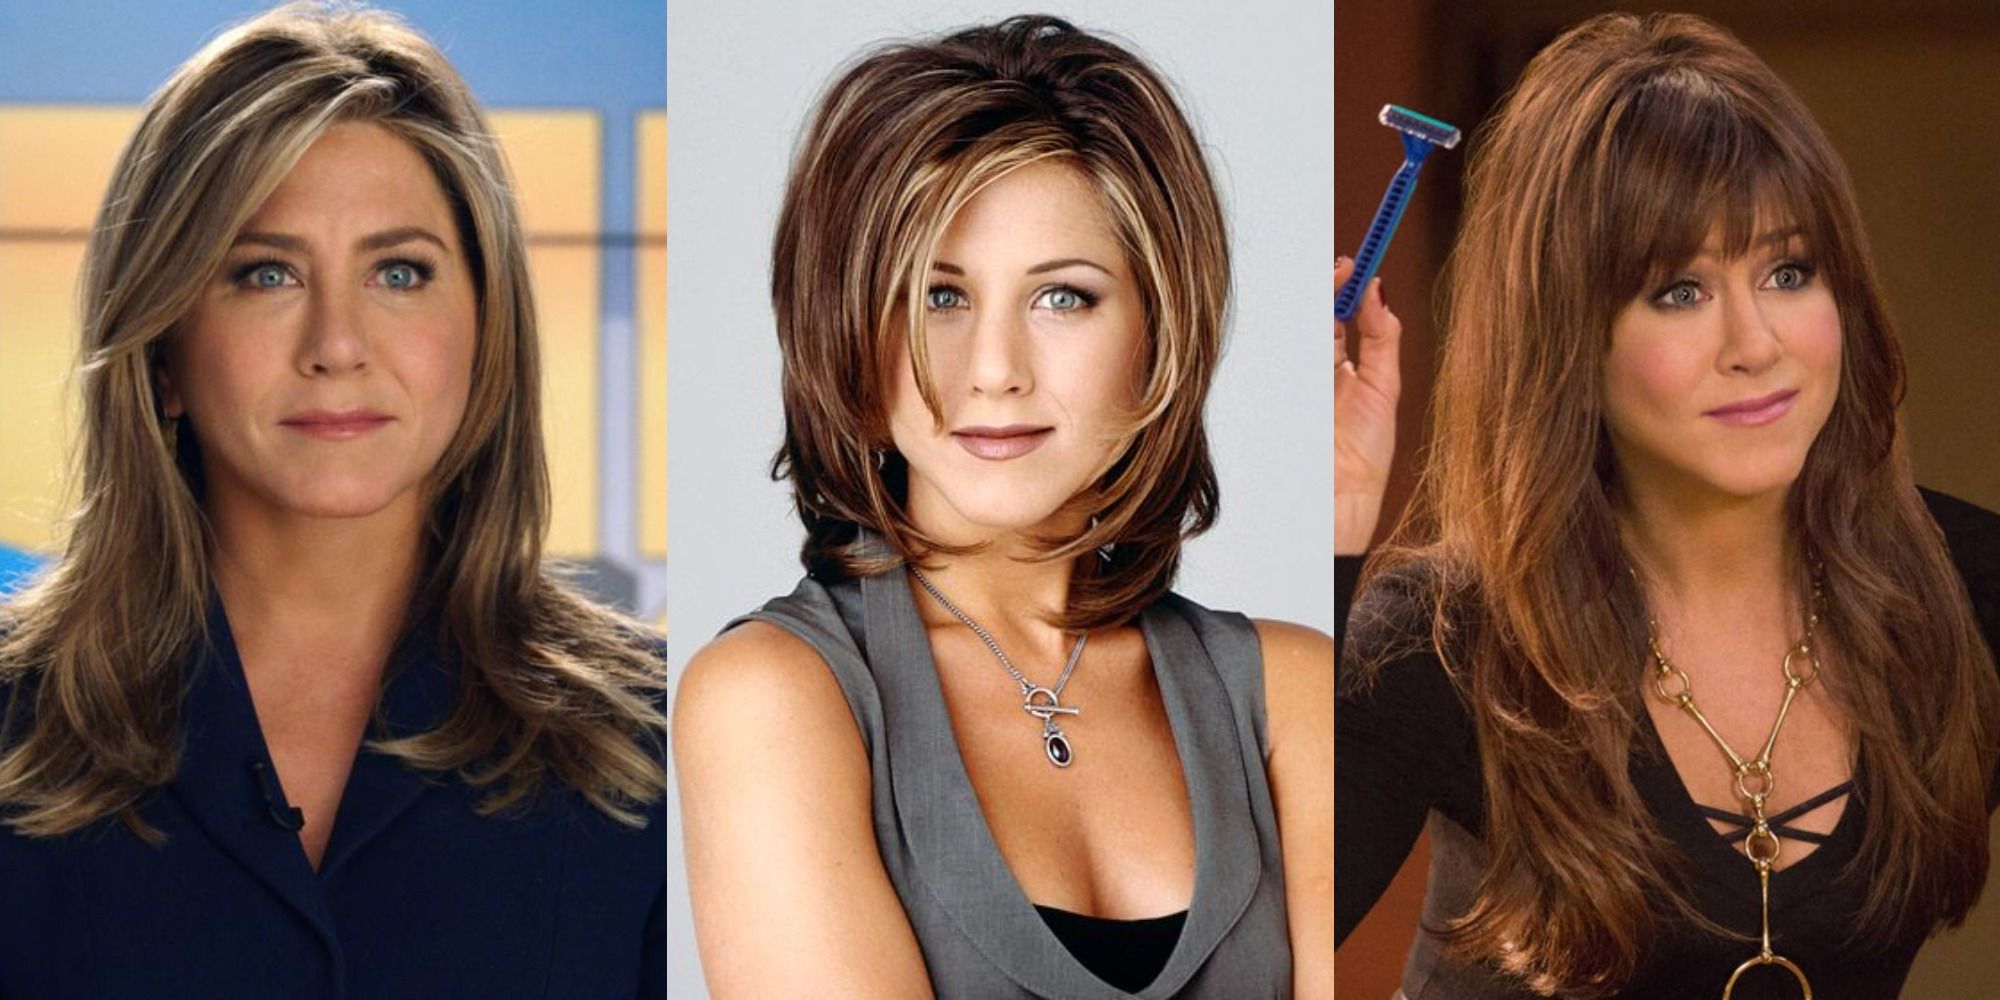 Split iamge of Jennifer Aniston's characters in The Morning Show, Friends and Horrible Bosses